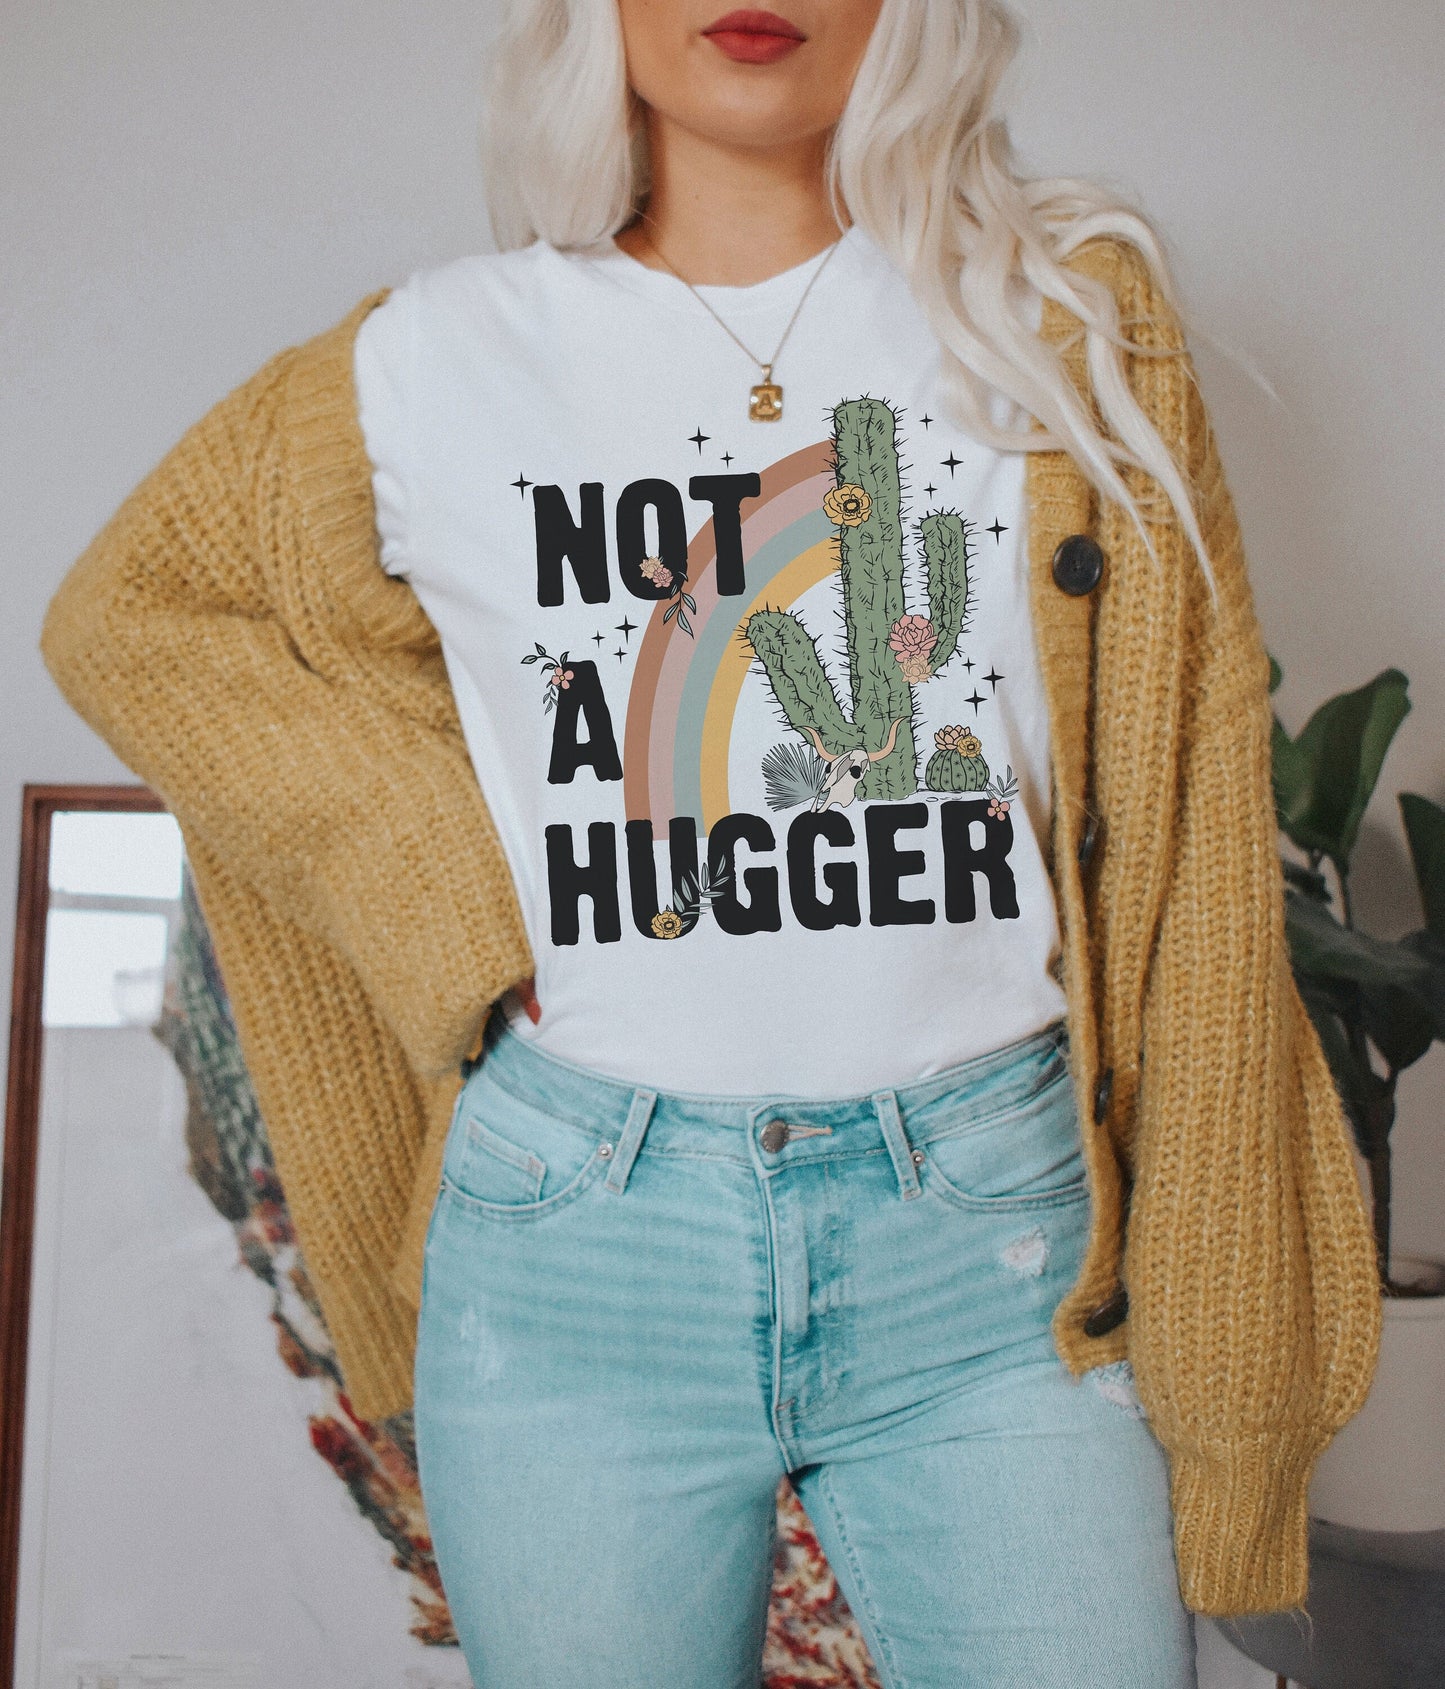 Not A Hugger Sassy Sarcastic Ultra Soft Graphic Tee Unisex Soft Tee T-shirt for Women or Men